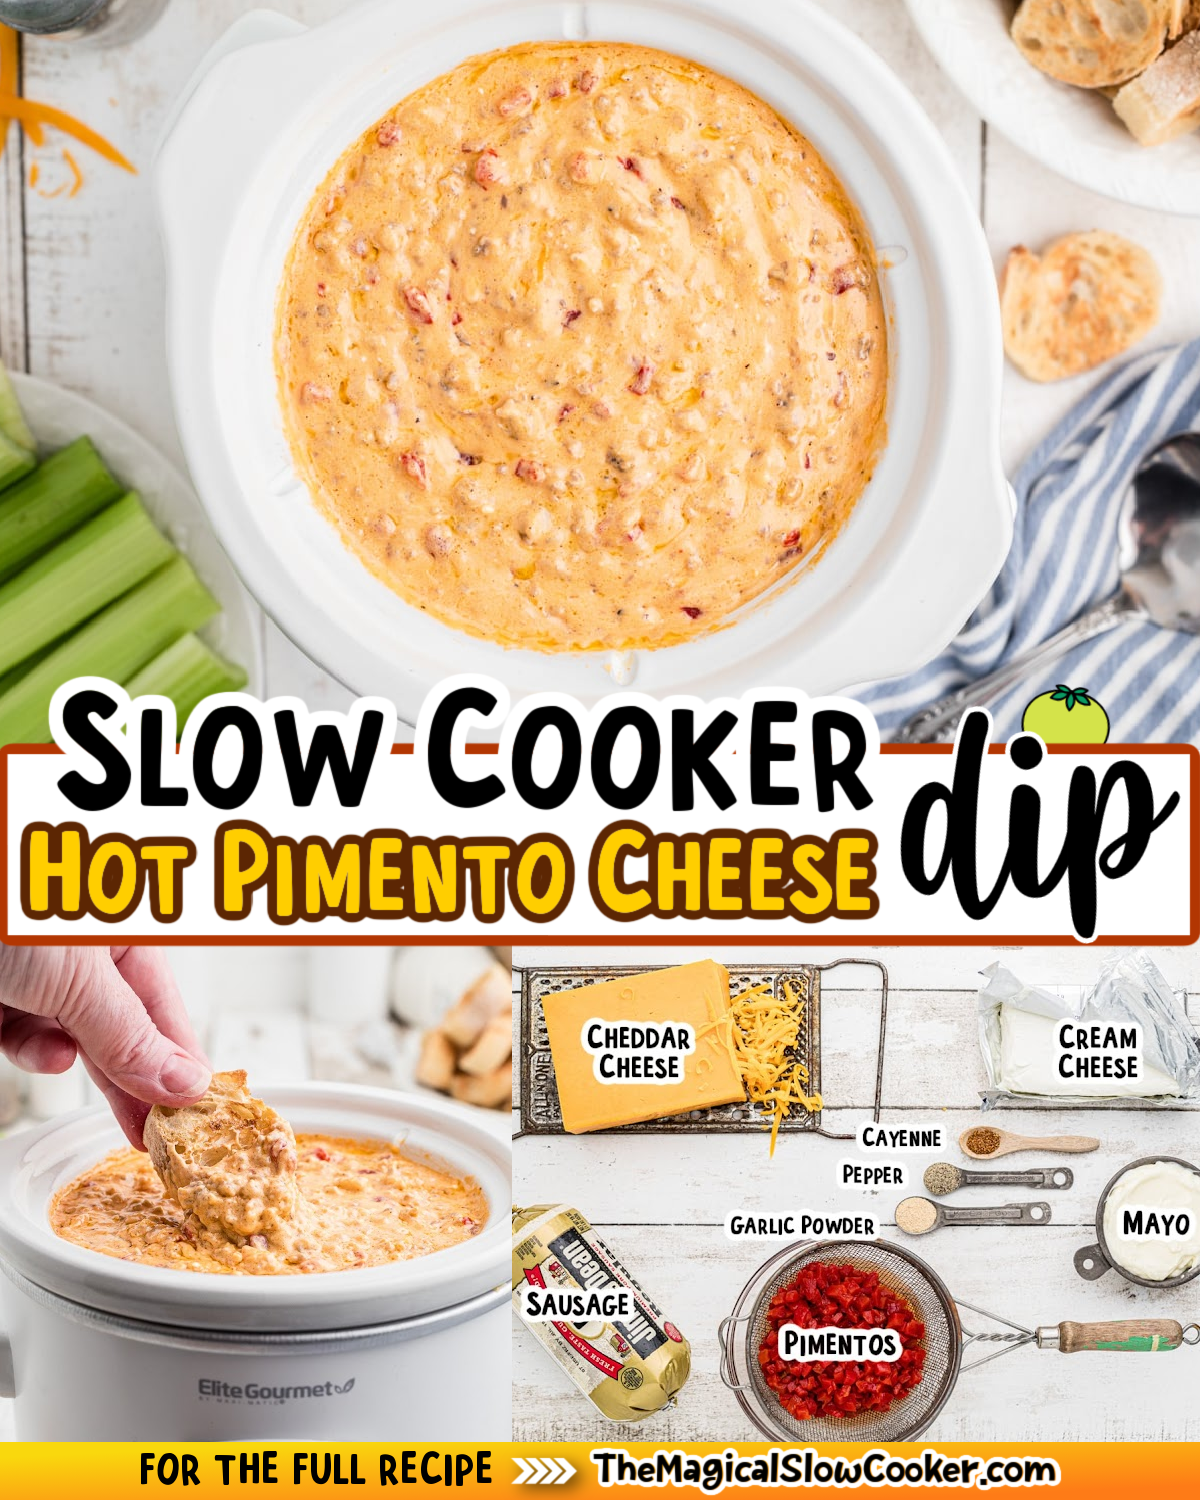 Hot pimento cheese dip images with text of what the ingredients are.